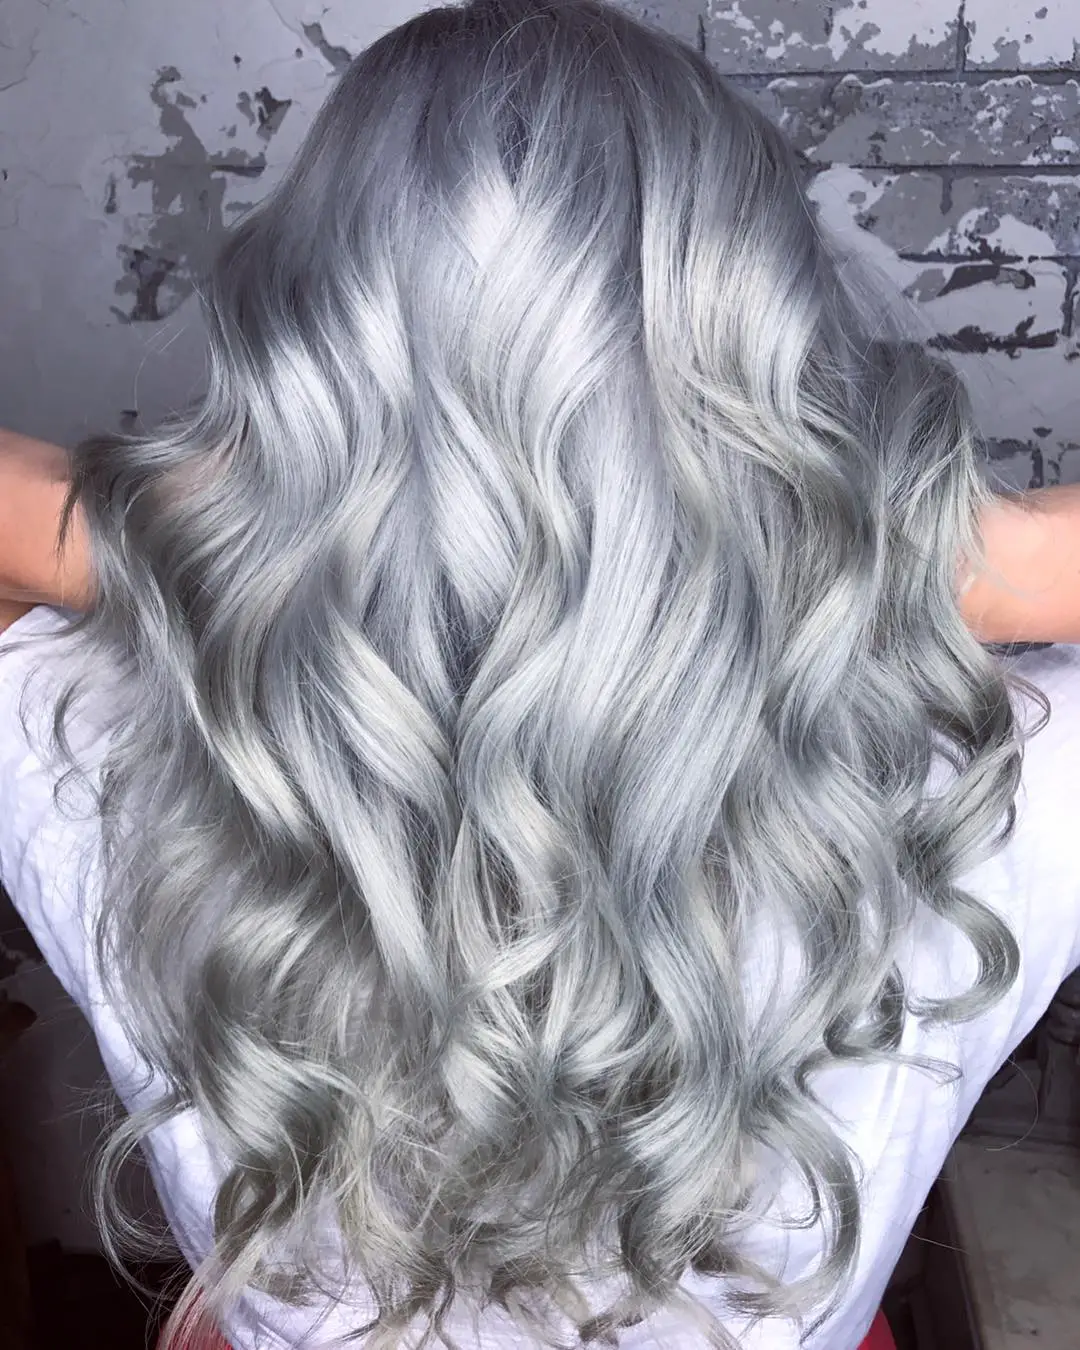 Subdued Silver Lining hair color